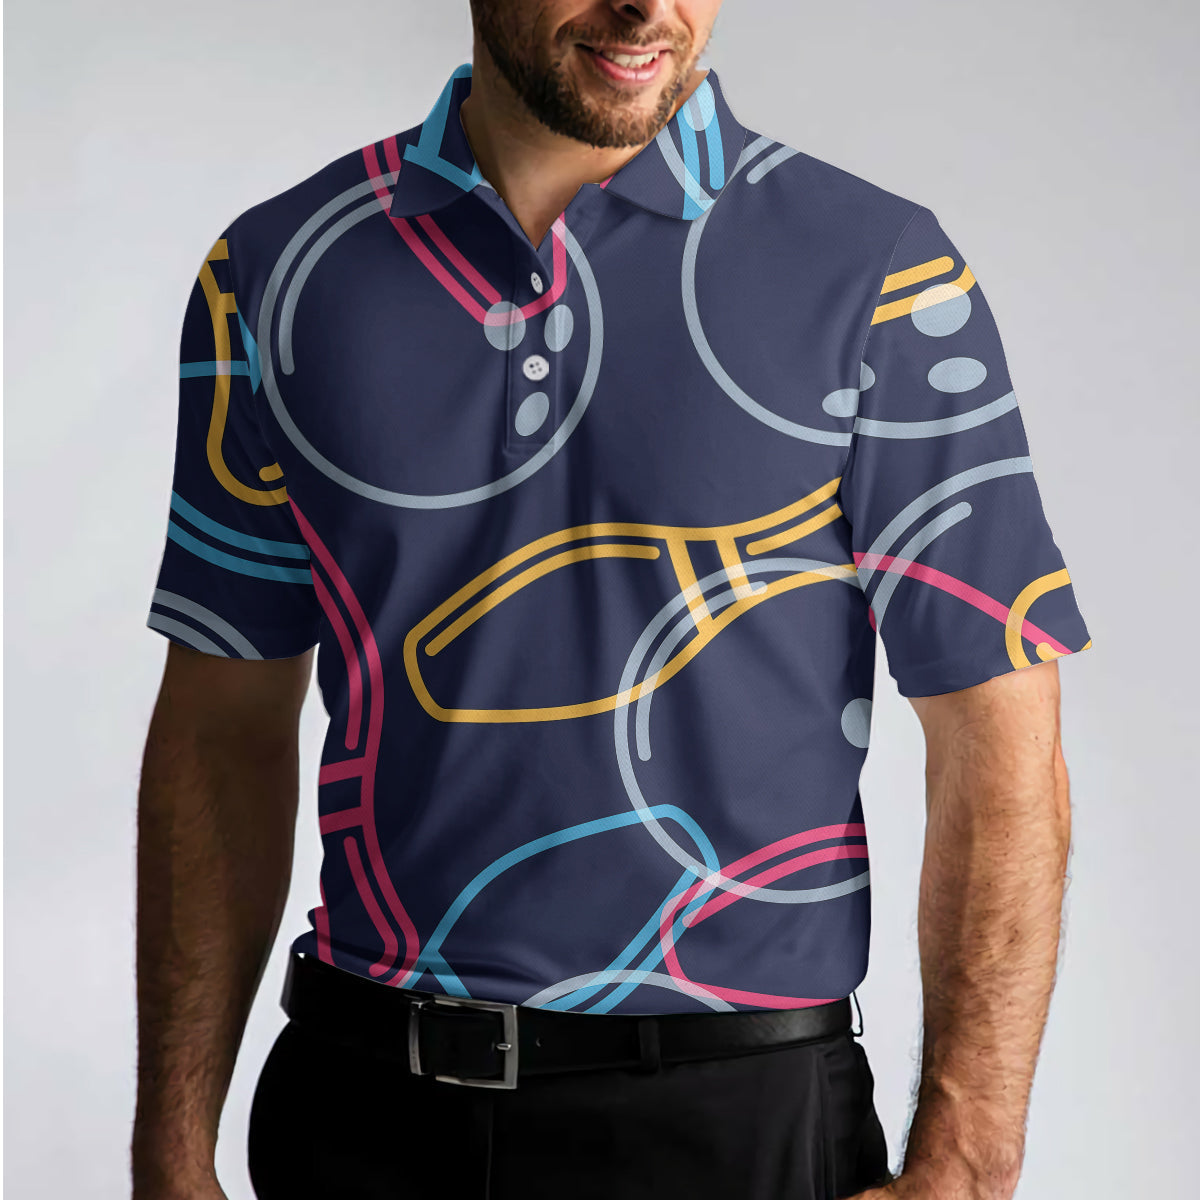 I Play Bowling Because I Like It Shirt For Men Polo Shirt/ Colorful Bowling Shirt Design For Male Bowlers Coolspod